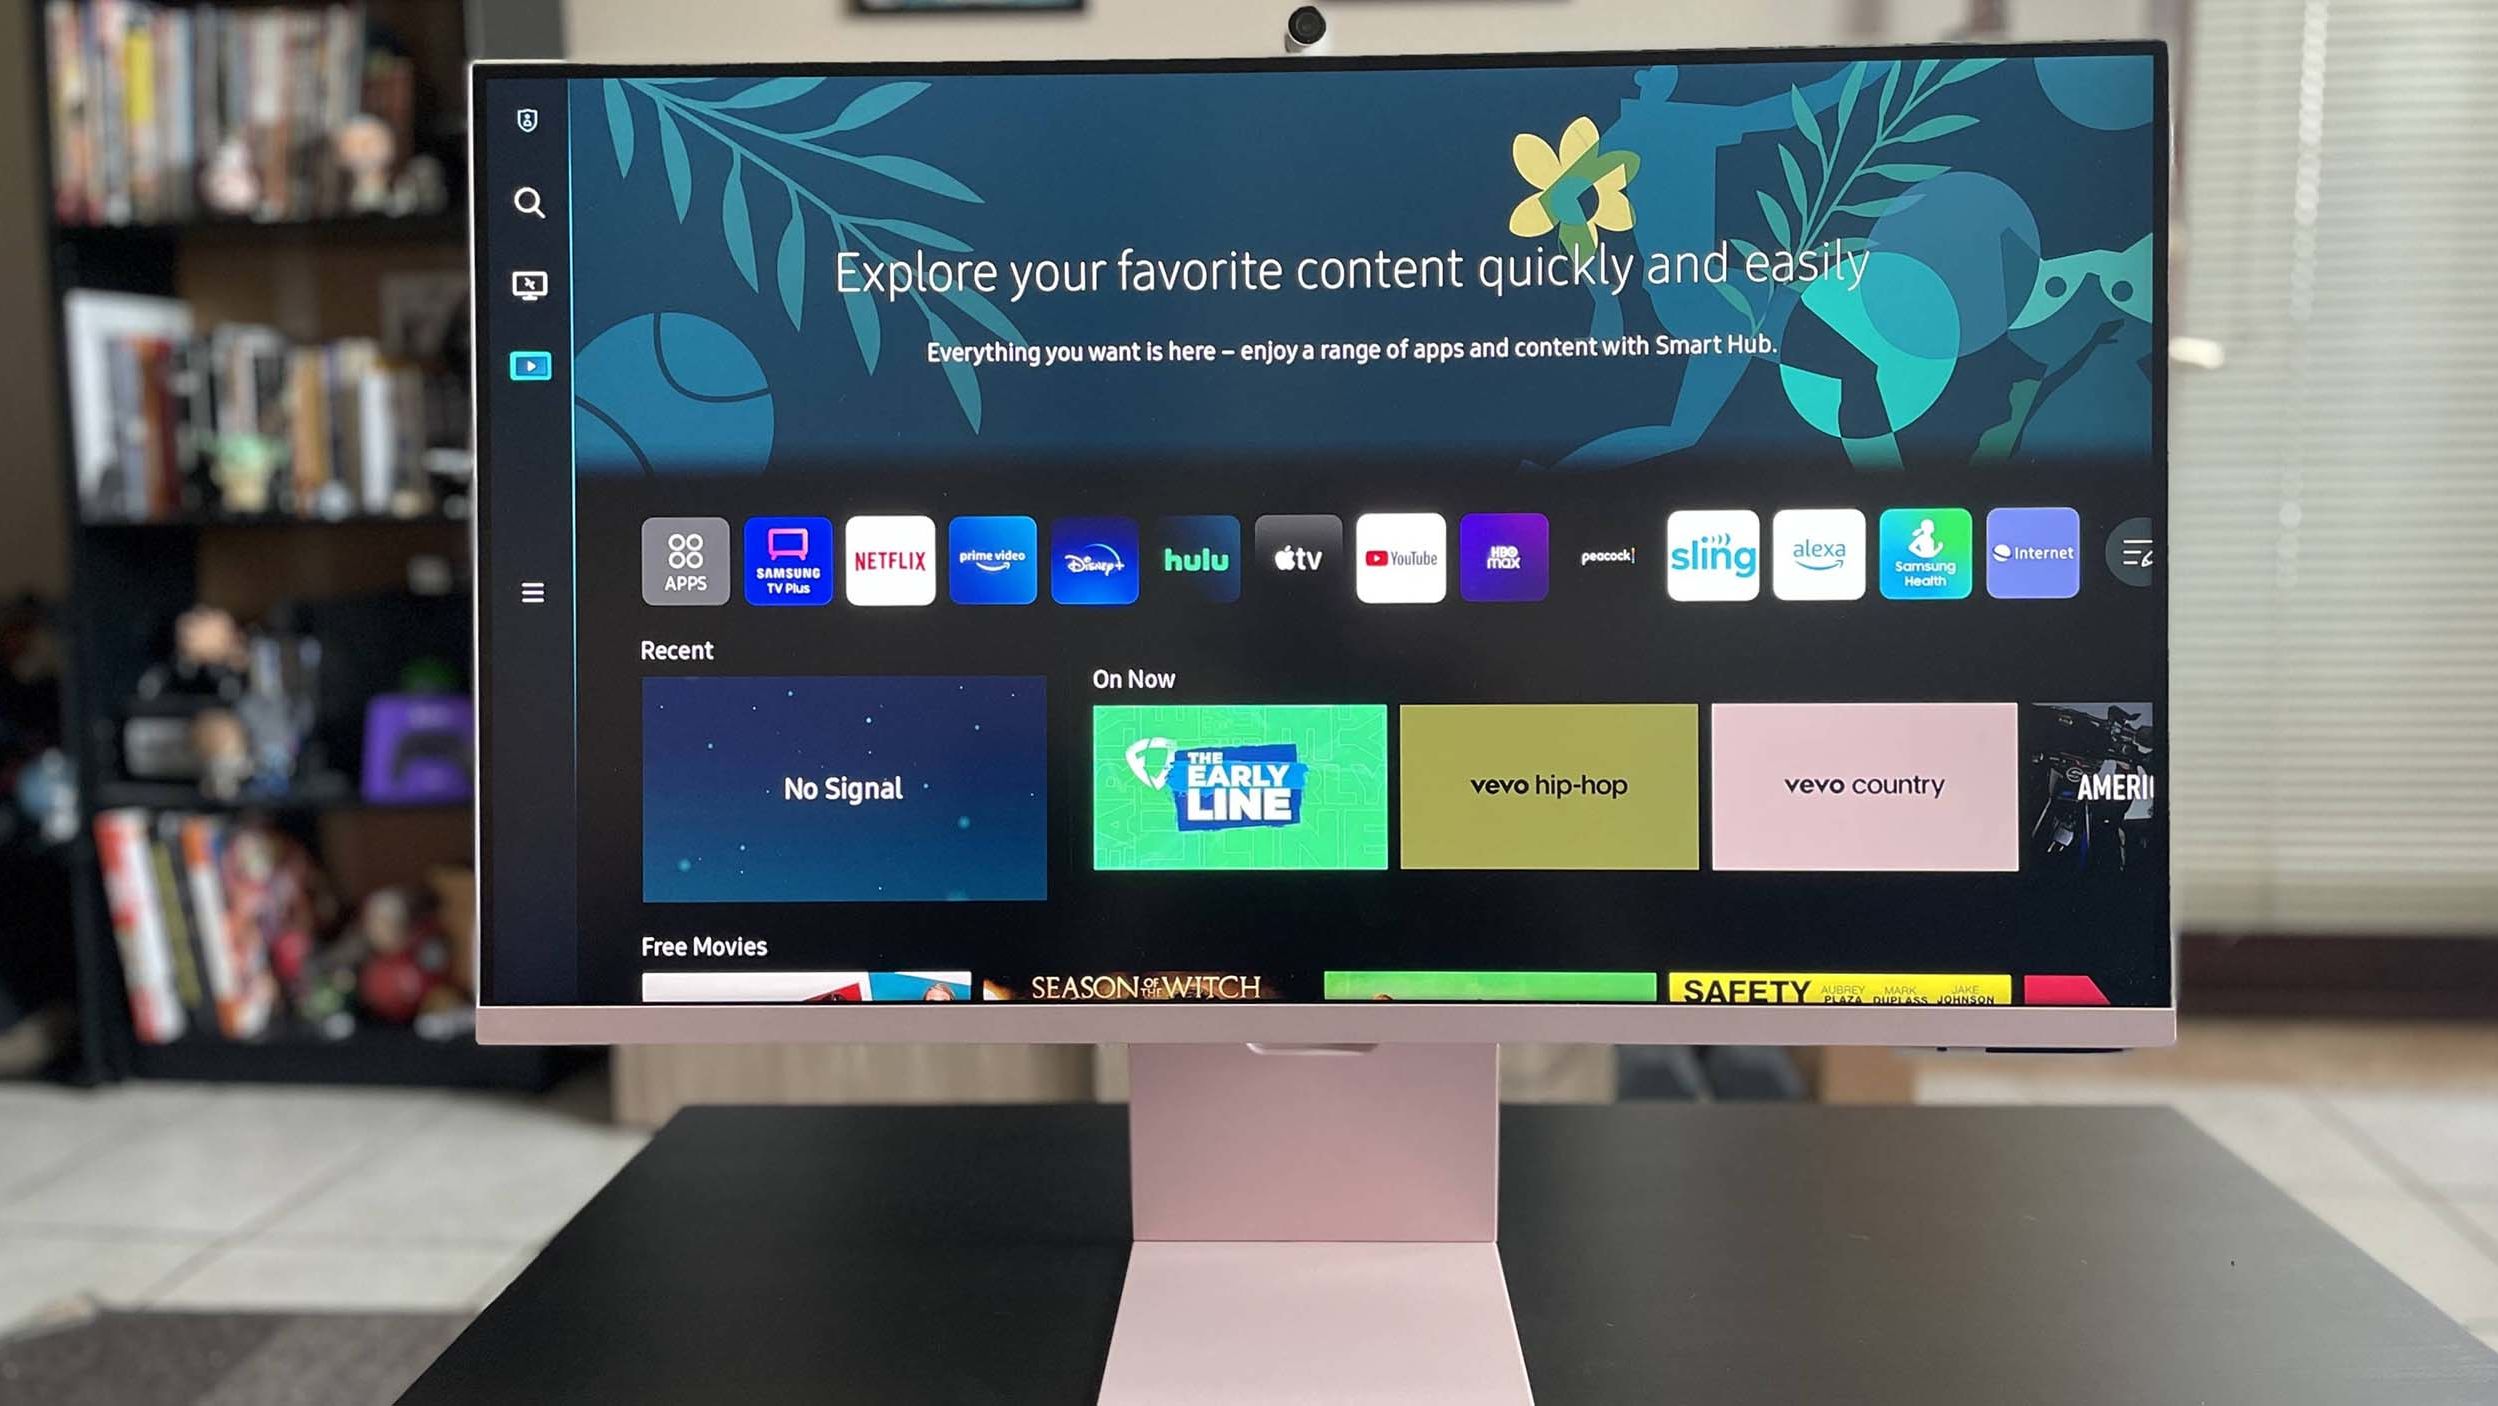 Use your TV as a computer monitor: Everything you need to know